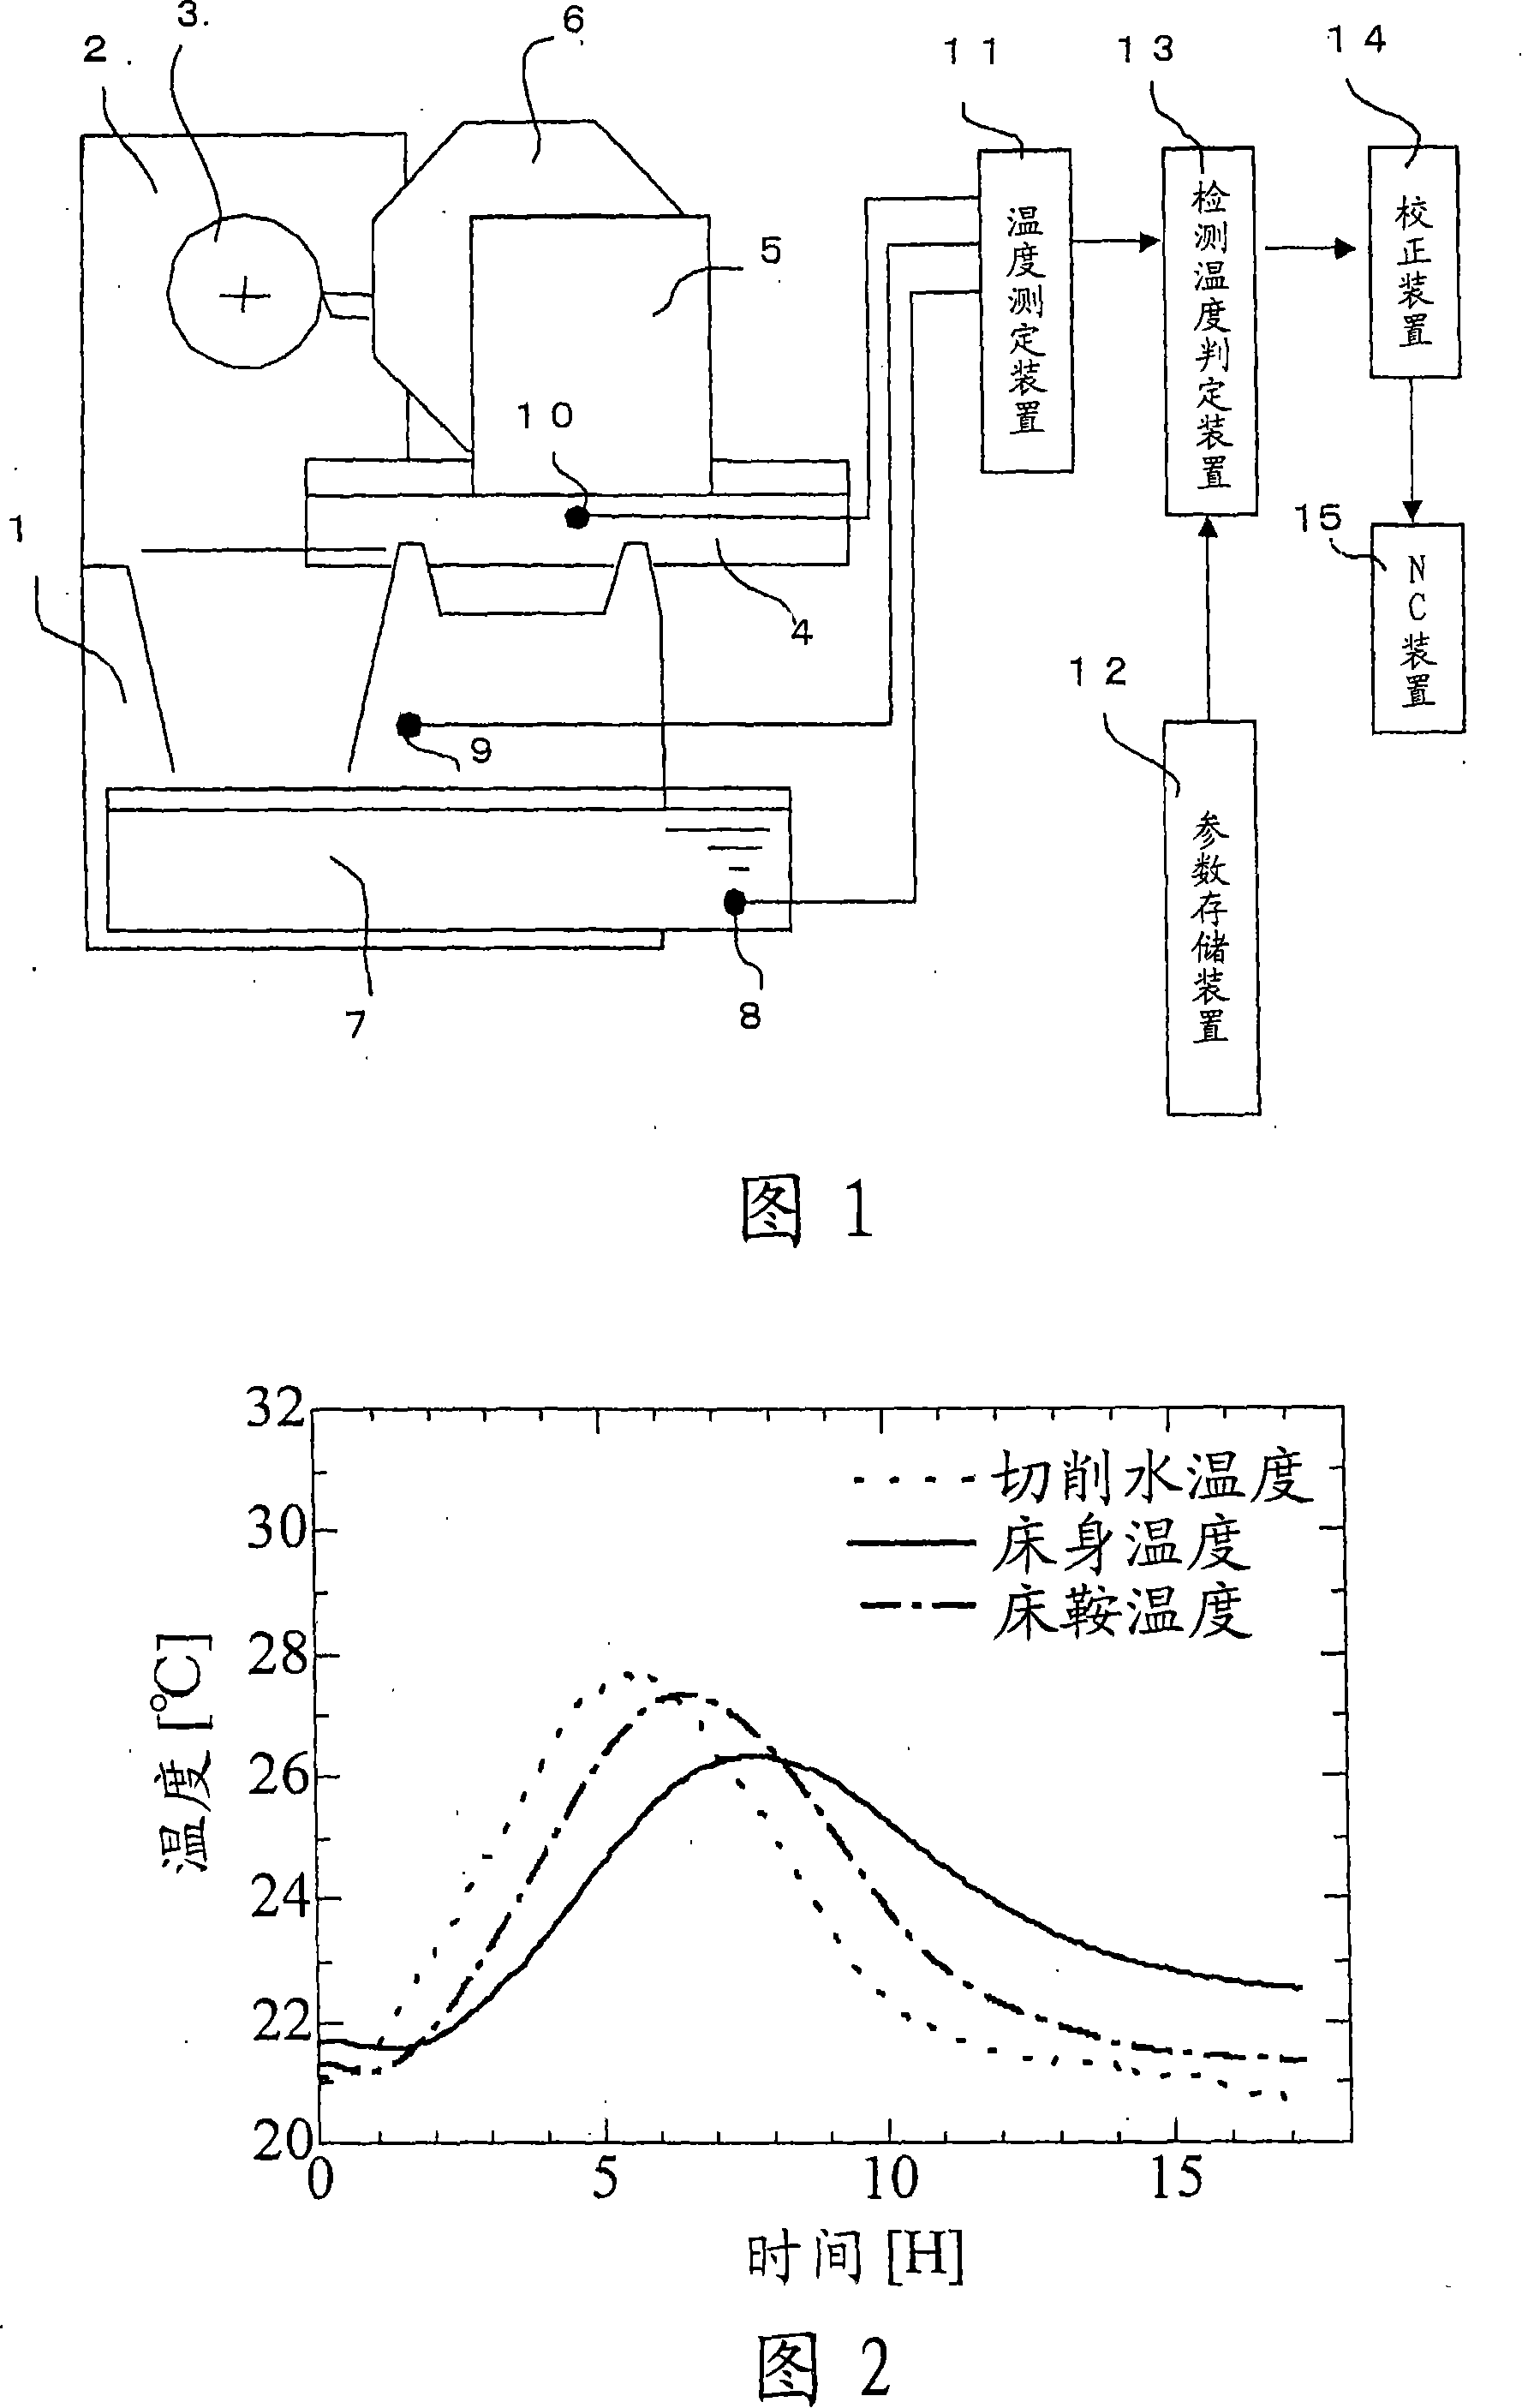 Method for detecting abnormality of temperature sensor in machine tool